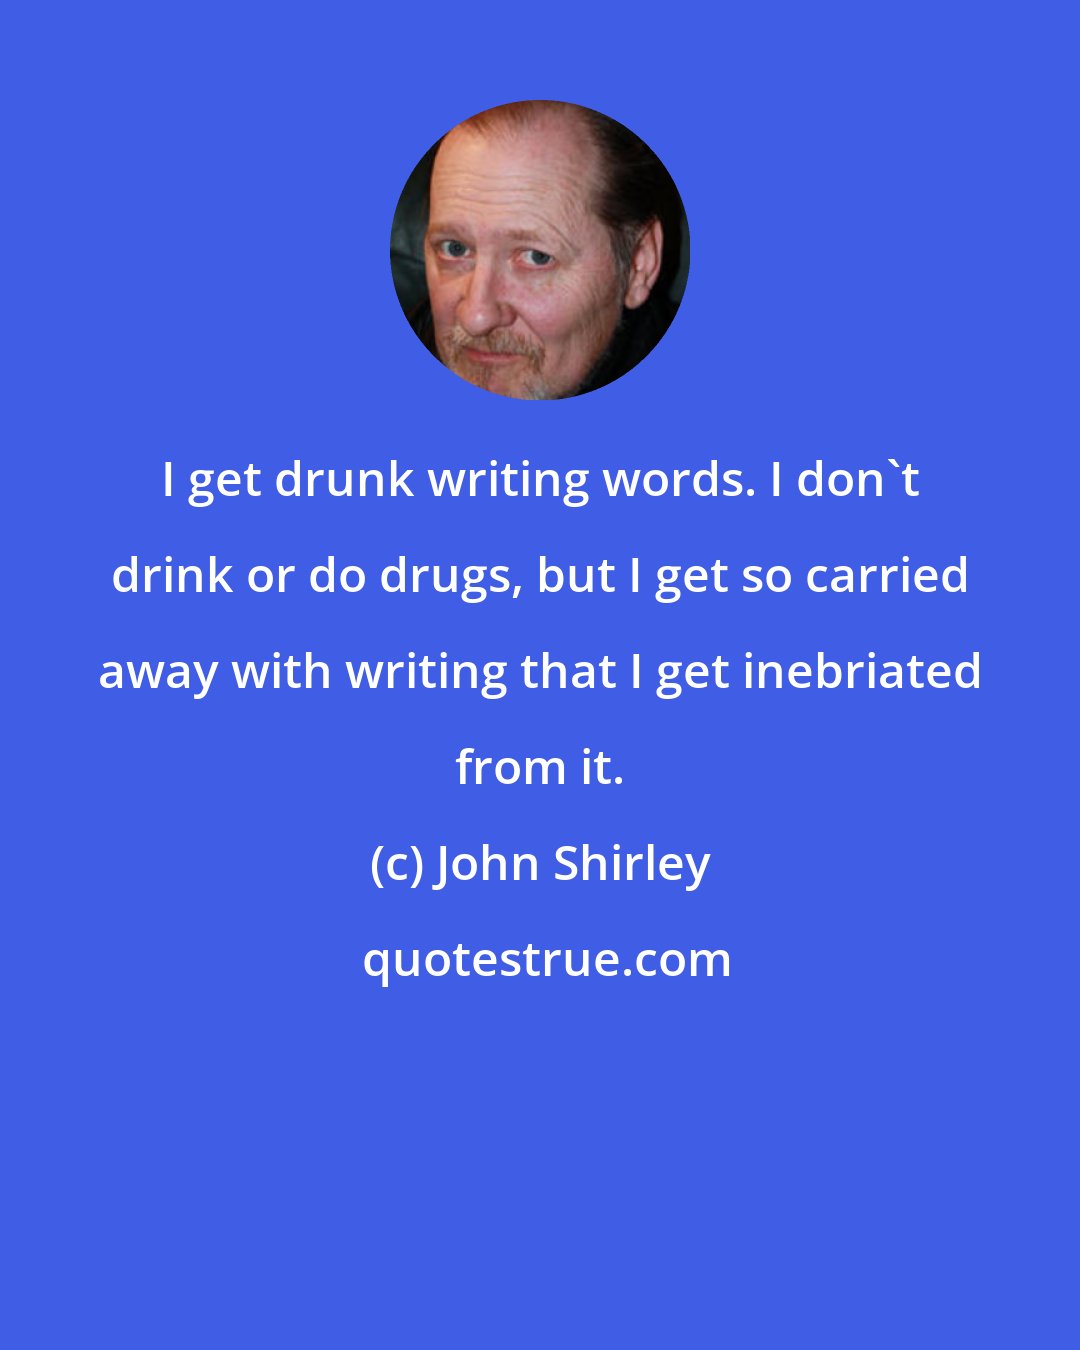 John Shirley: I get drunk writing words. I don't drink or do drugs, but I get so carried away with writing that I get inebriated from it.